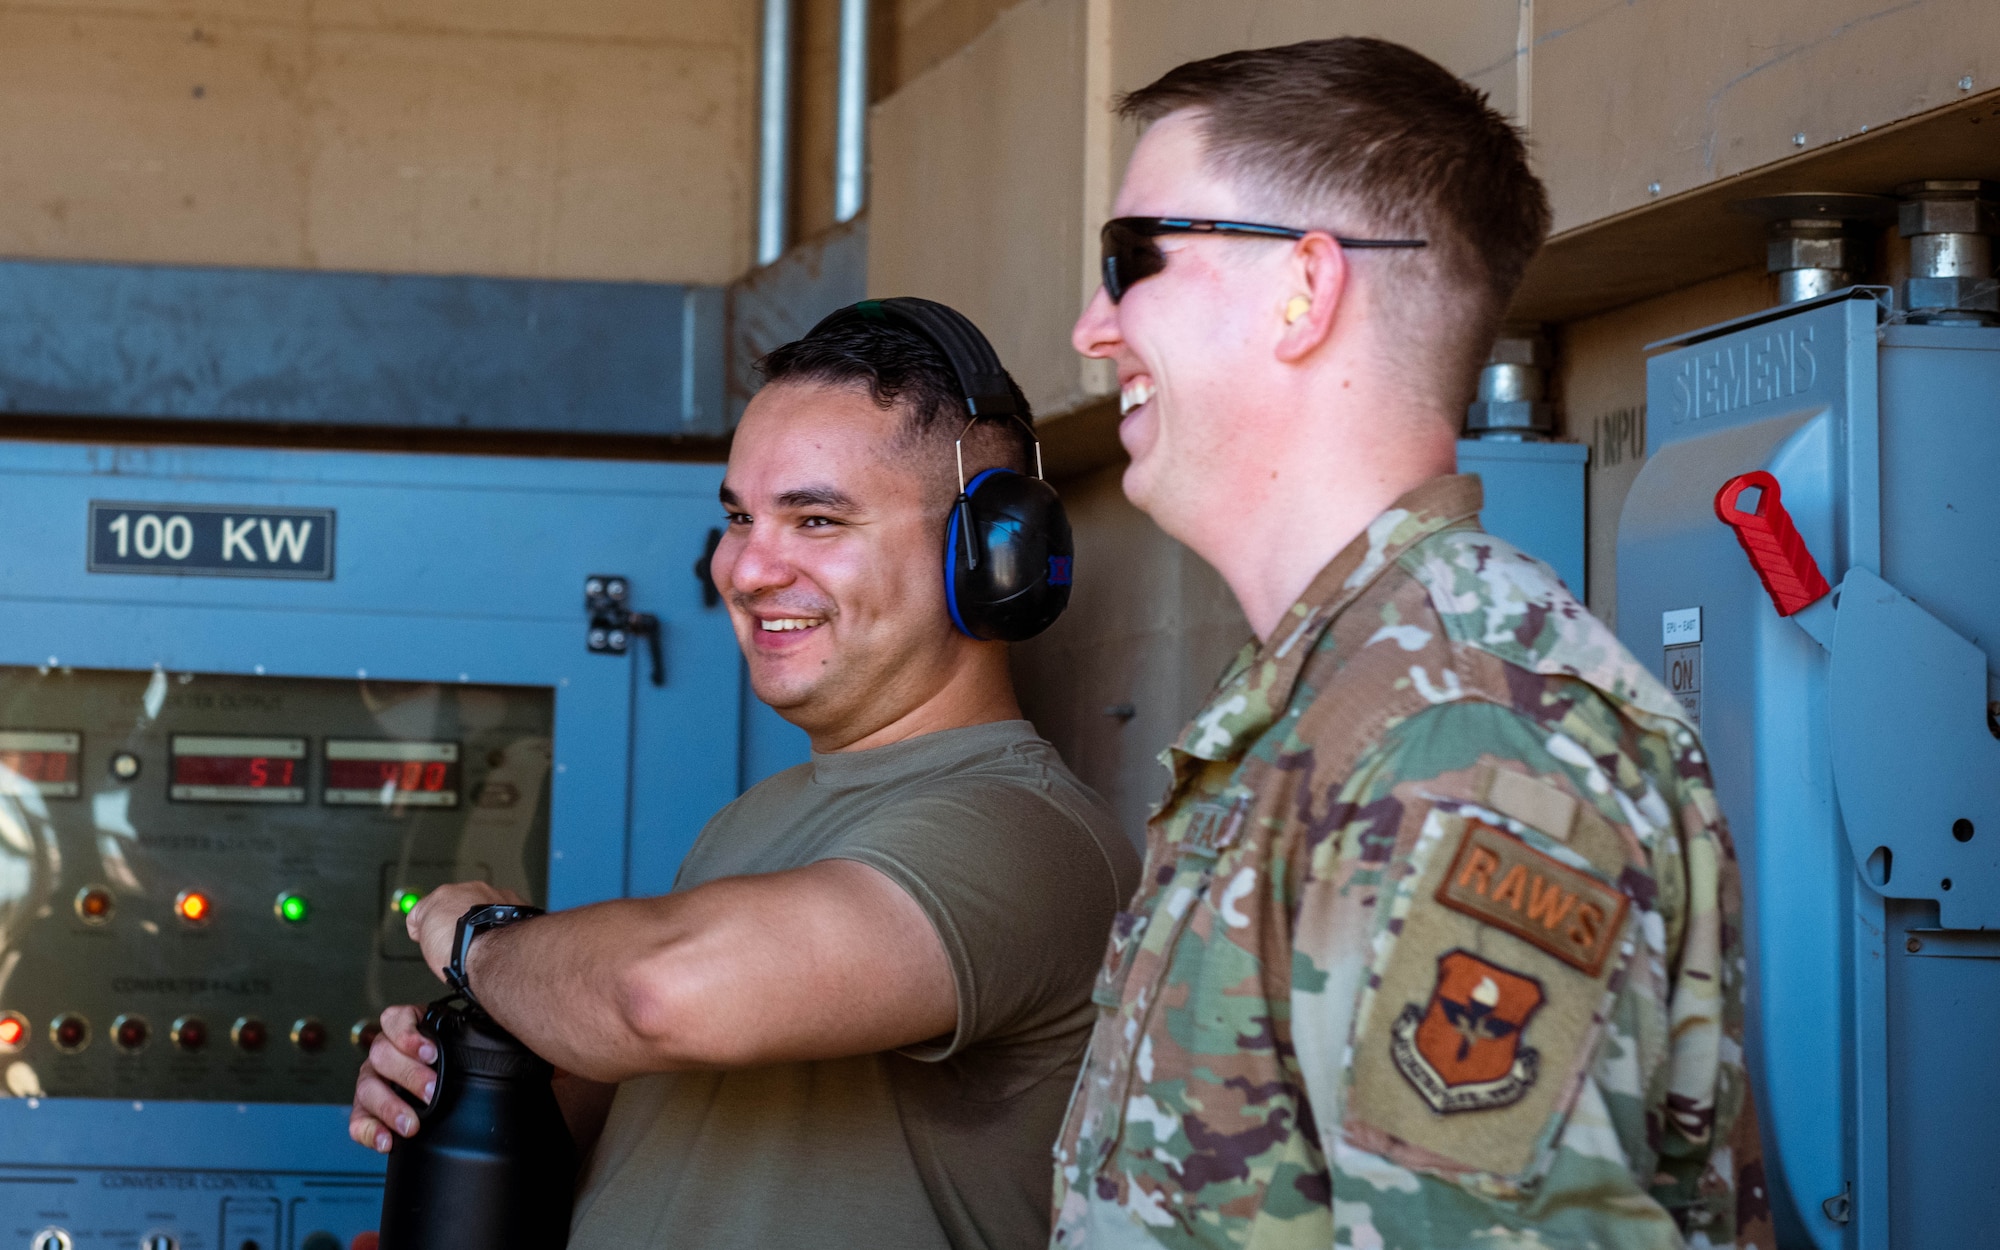 U.S. Air Force Staff Sgt. Juan Cervantes (left), 607th Air Control Squadron ground radar systems supervisor, and U.S. Air Force Staff Sgt. Kyle Tidwell (right), 607th Air Control Squadron noncommissioned officer in charge of ground radar systems, observe operators in a bunker, June 28, 2023, at Luke Air Force Base, Arizona.